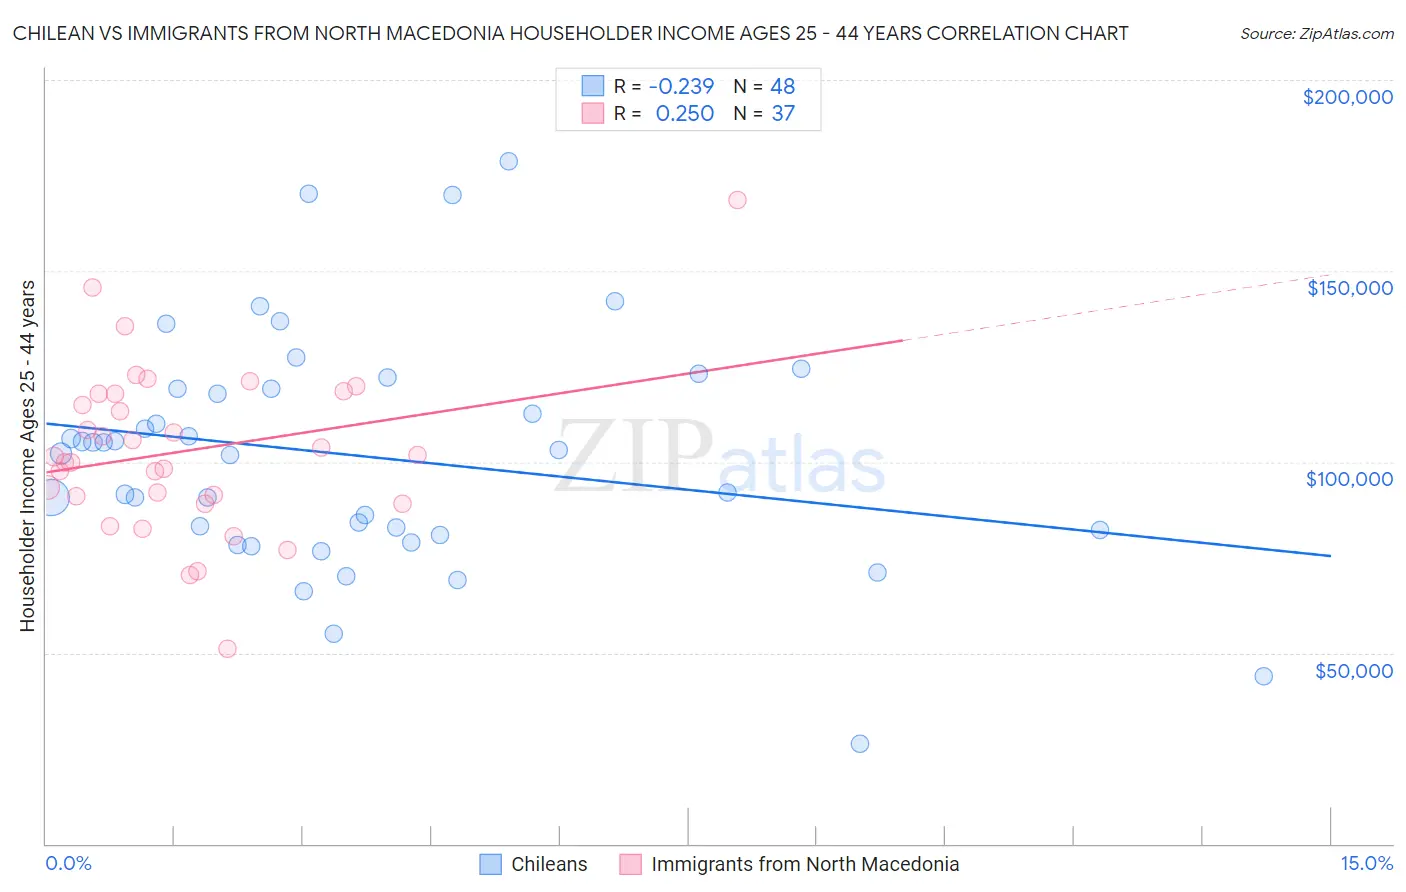 Chilean vs Immigrants from North Macedonia Householder Income Ages 25 - 44 years